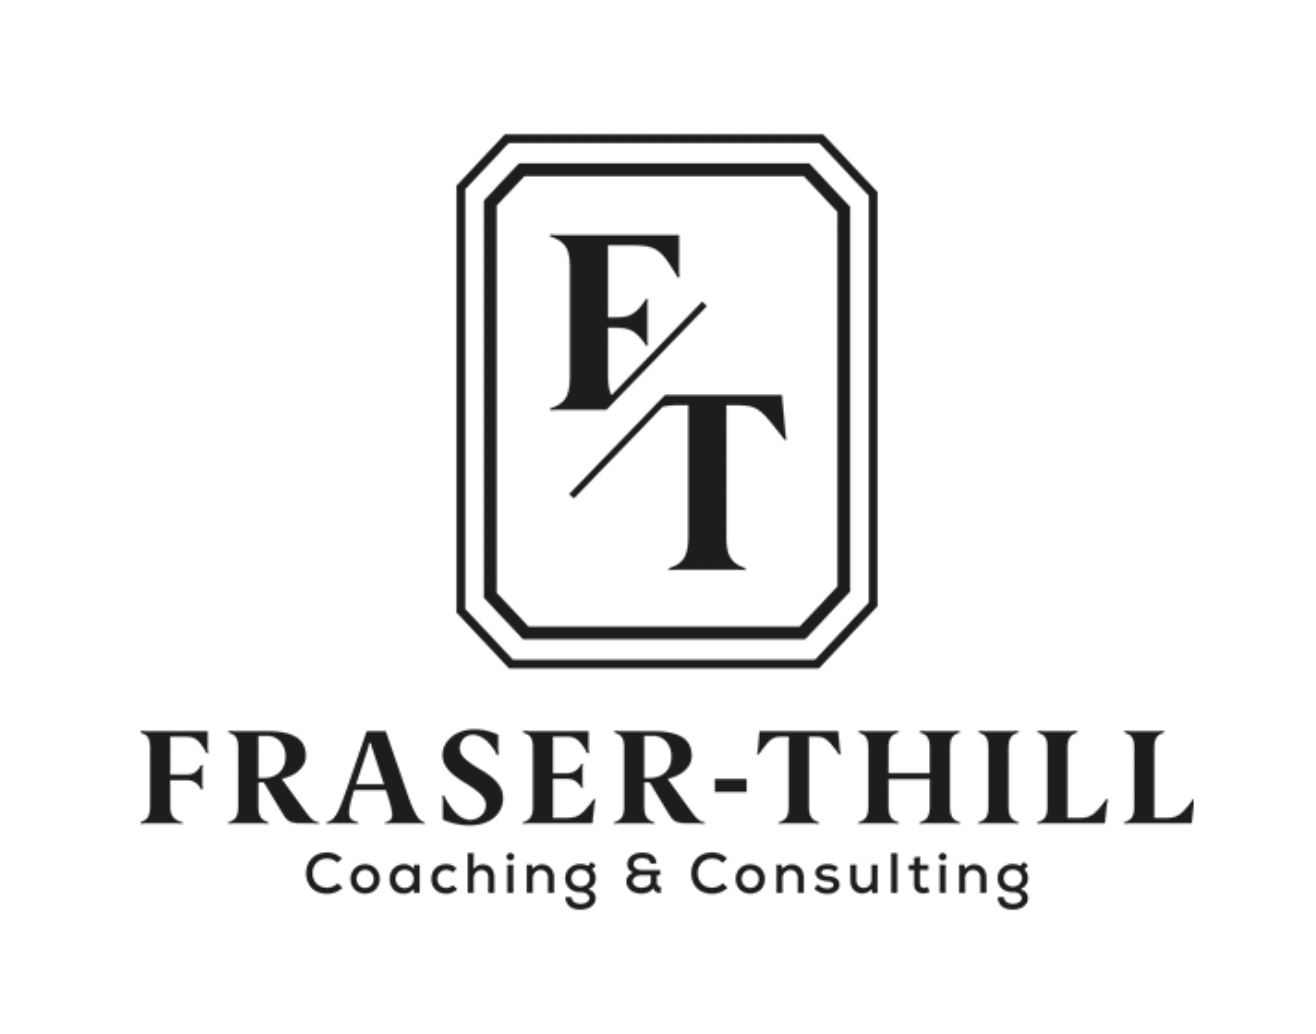 Fraser-Thill Coaching & Consulting, LLC